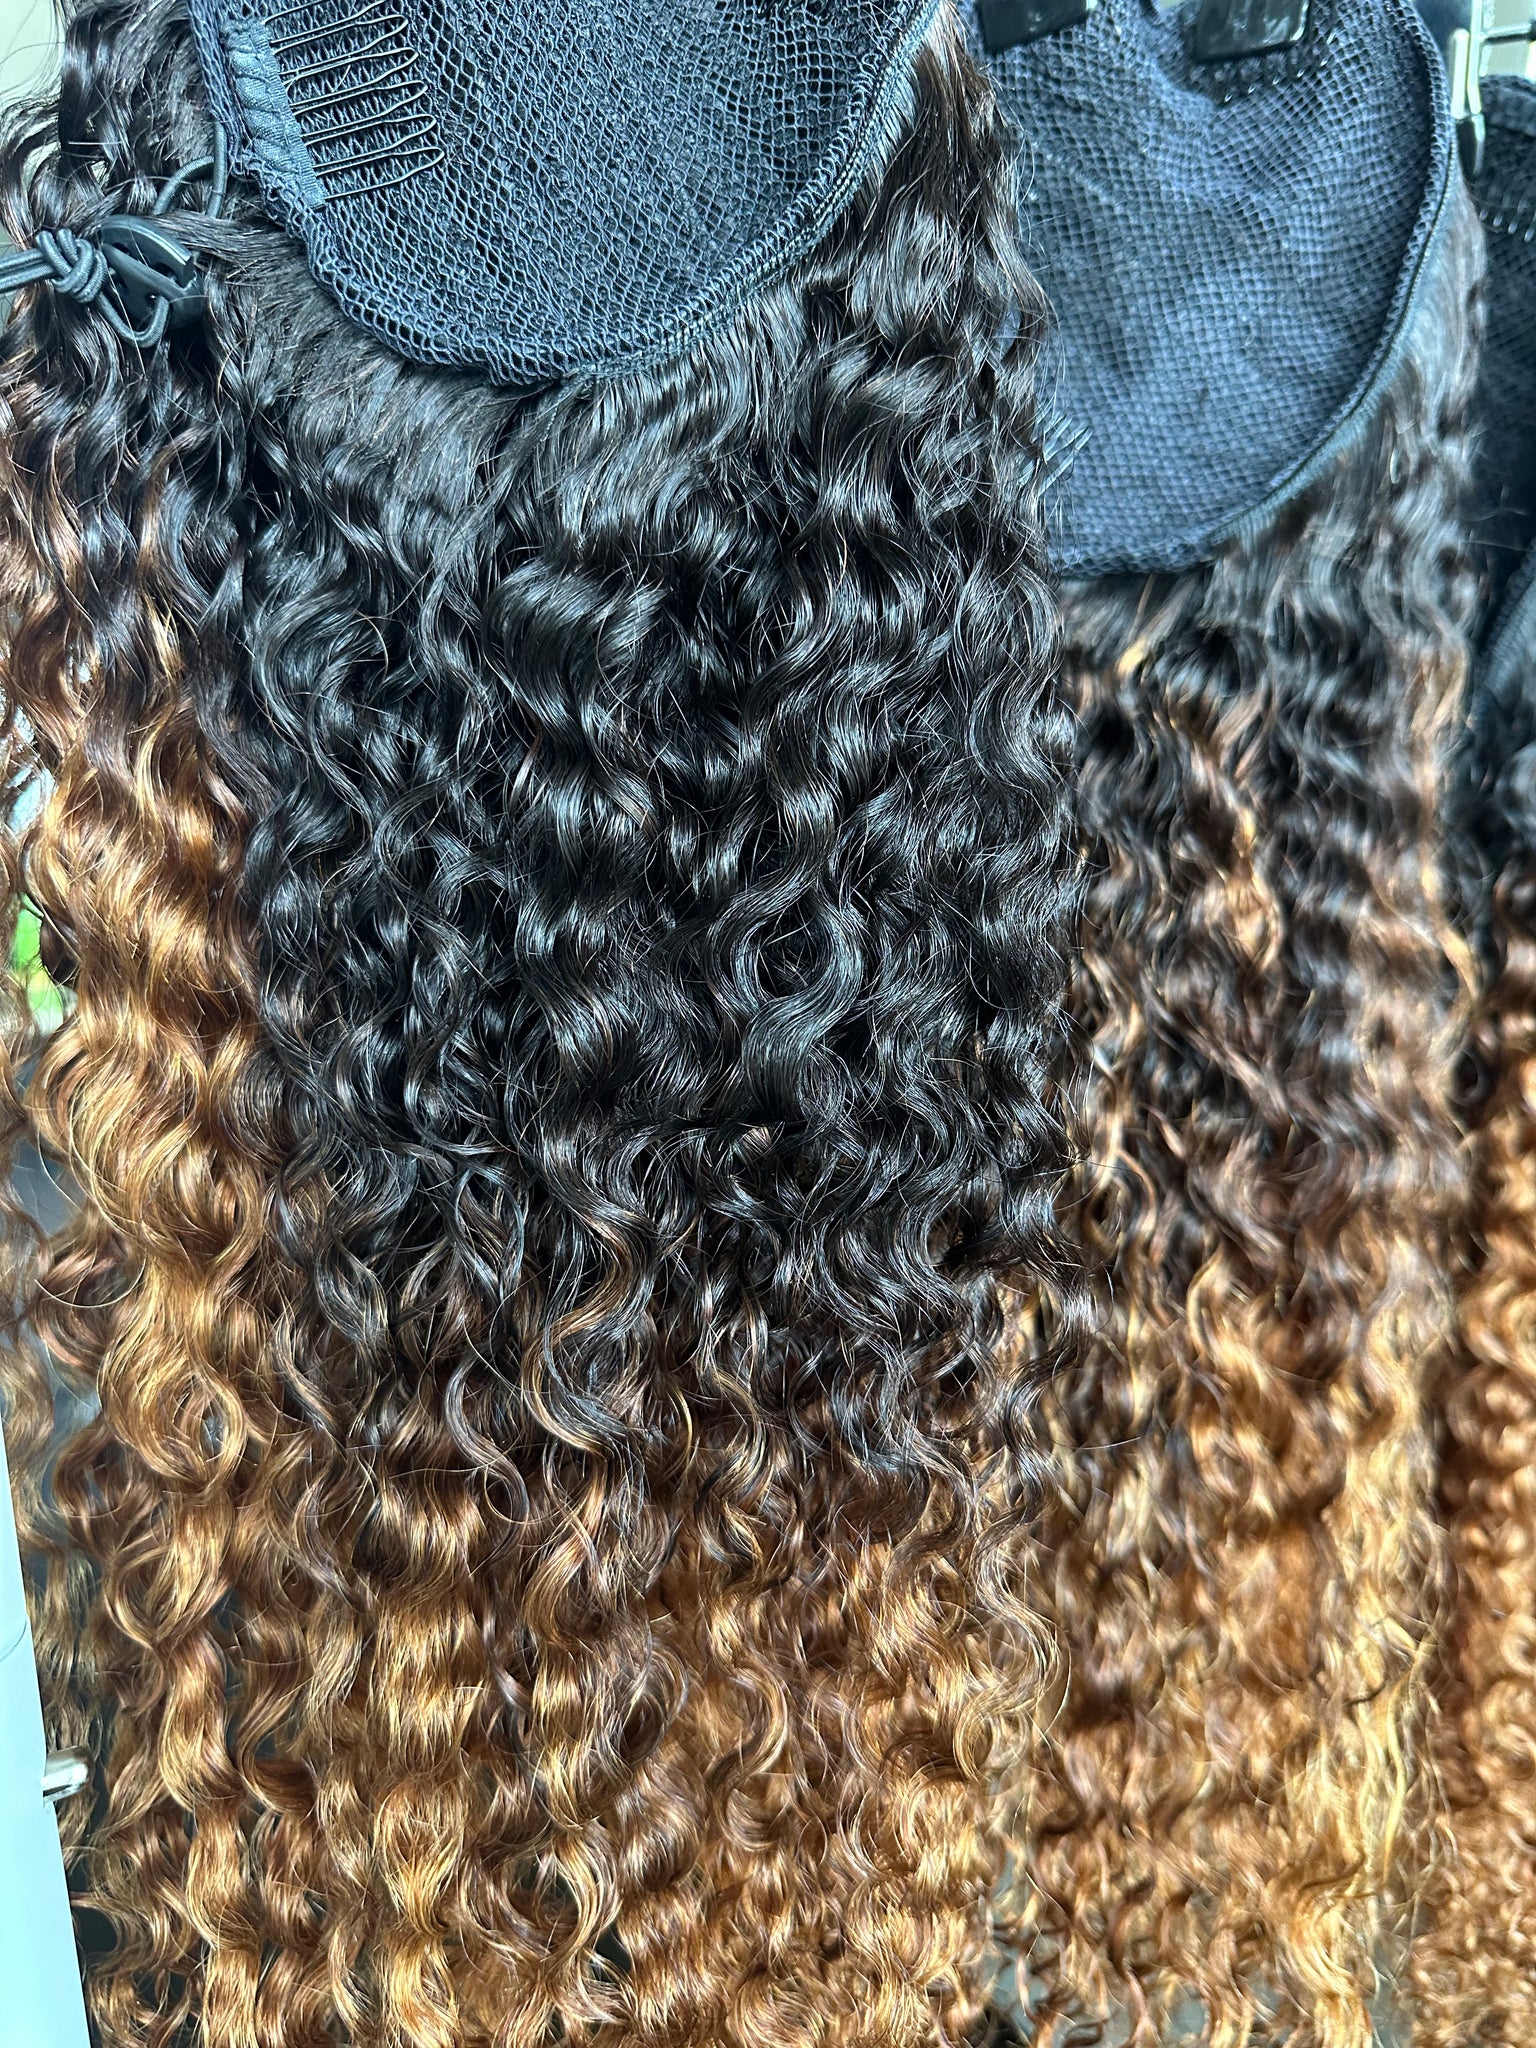 Ombre’: Brazilian Curly Ponytail Custom Colored